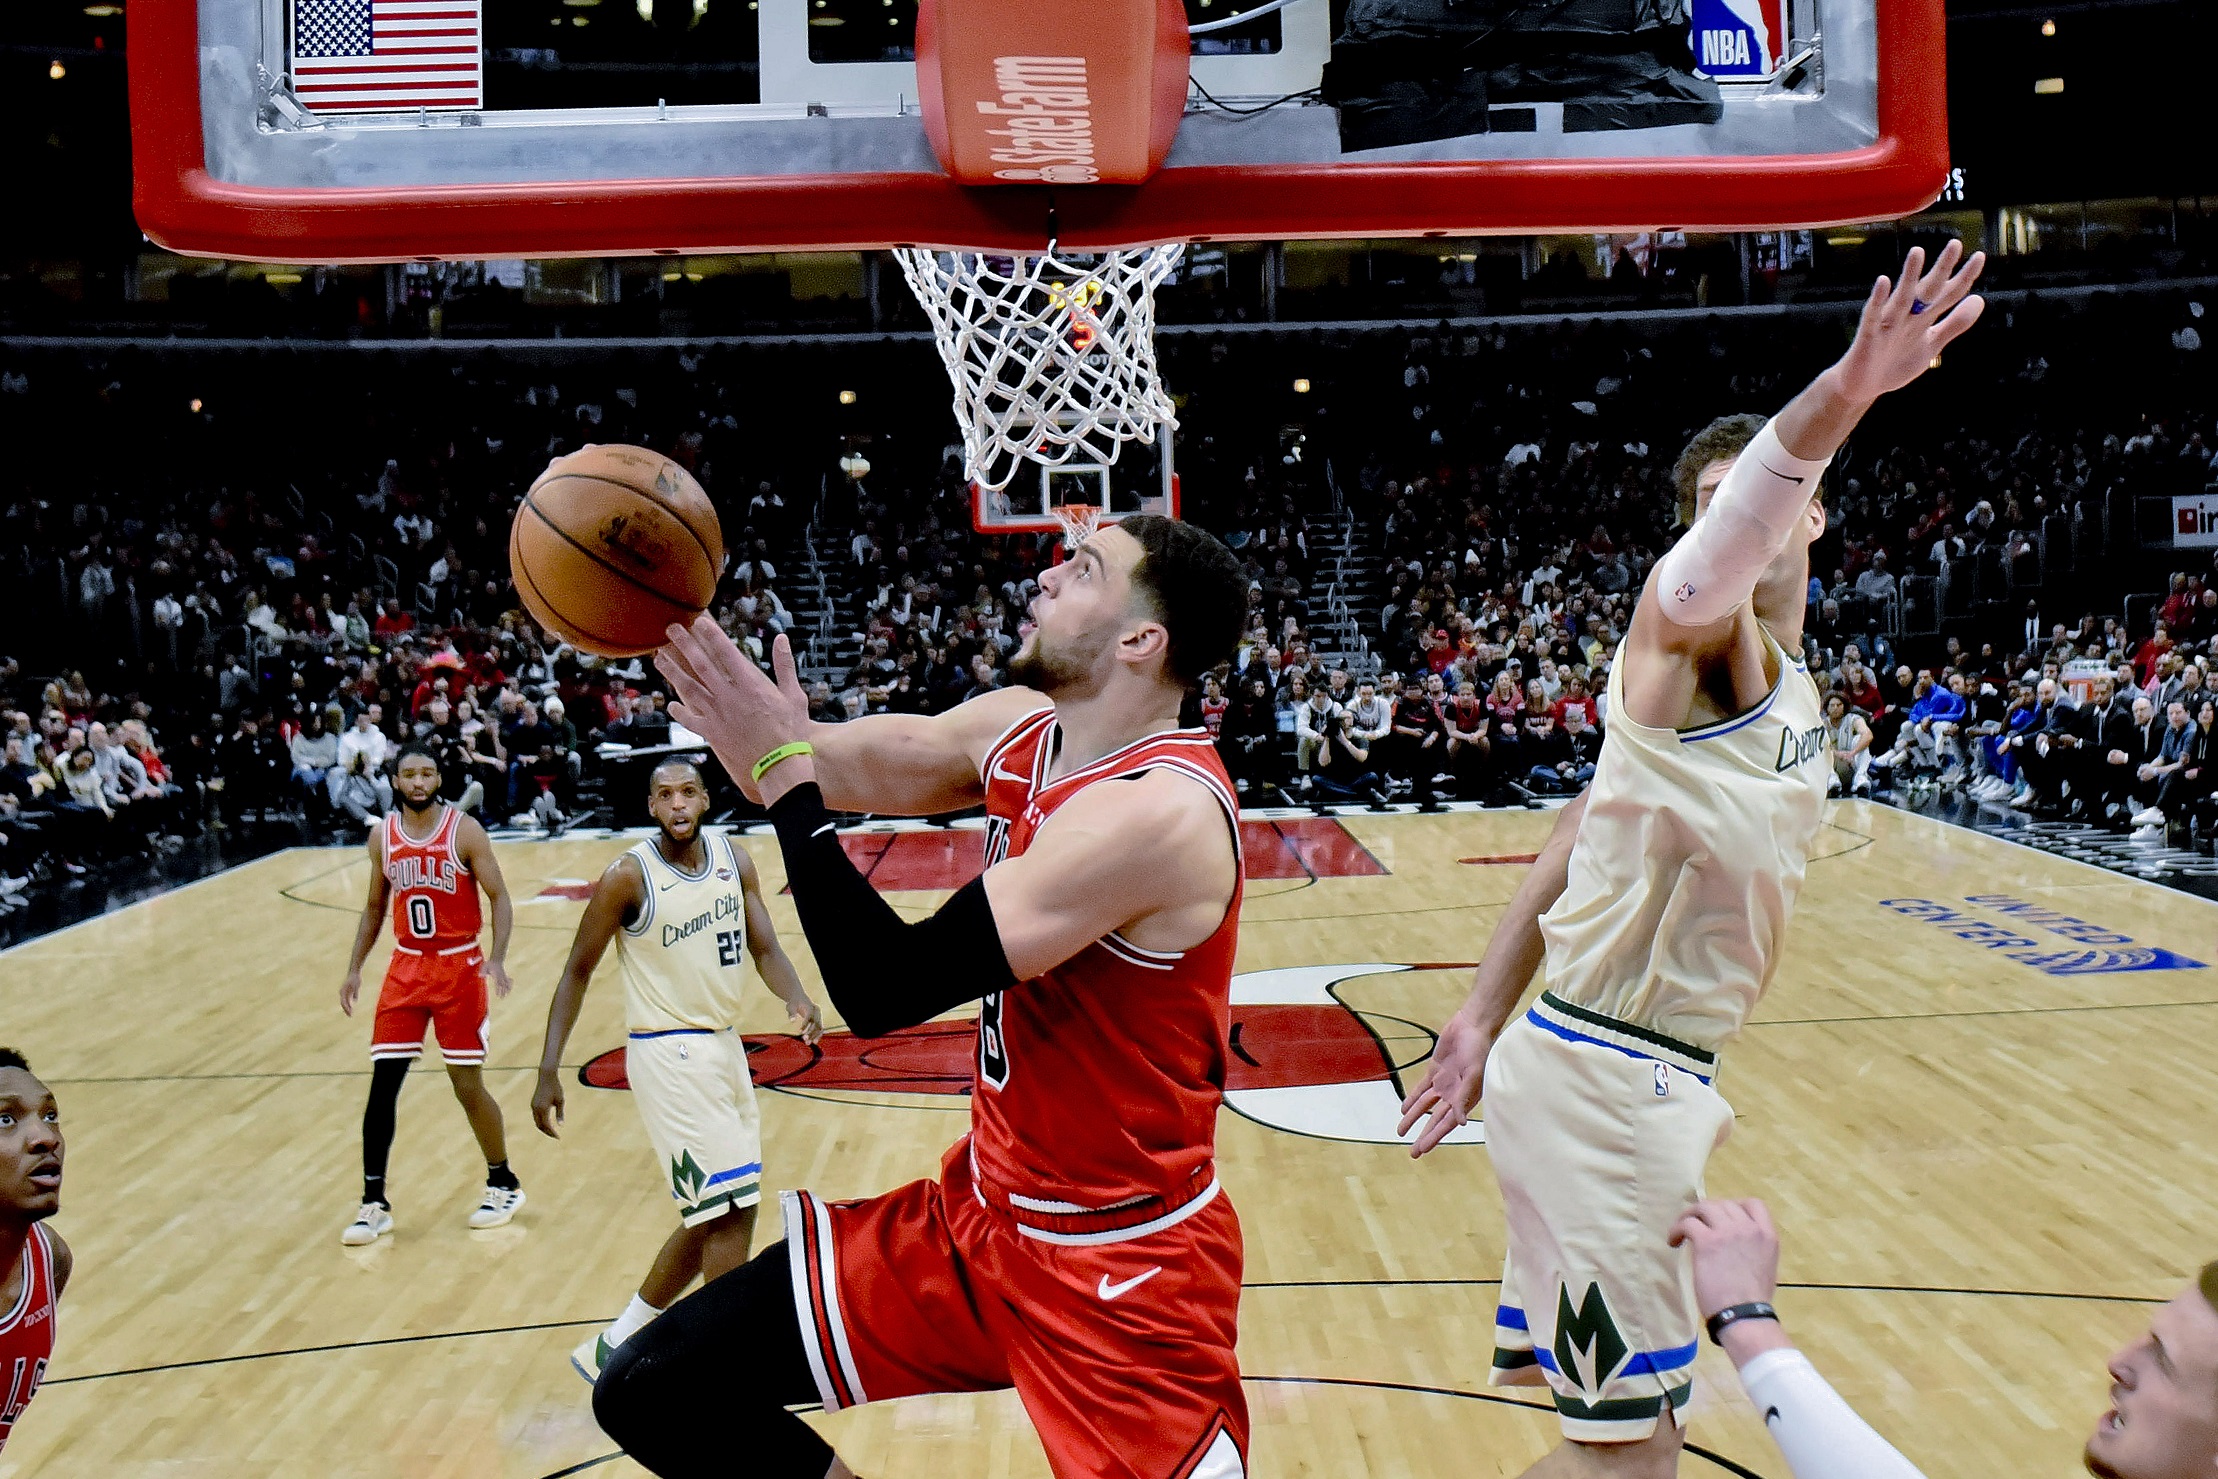 Milwaukee looks to clinch series in game 5, LaVine in “health & safety”